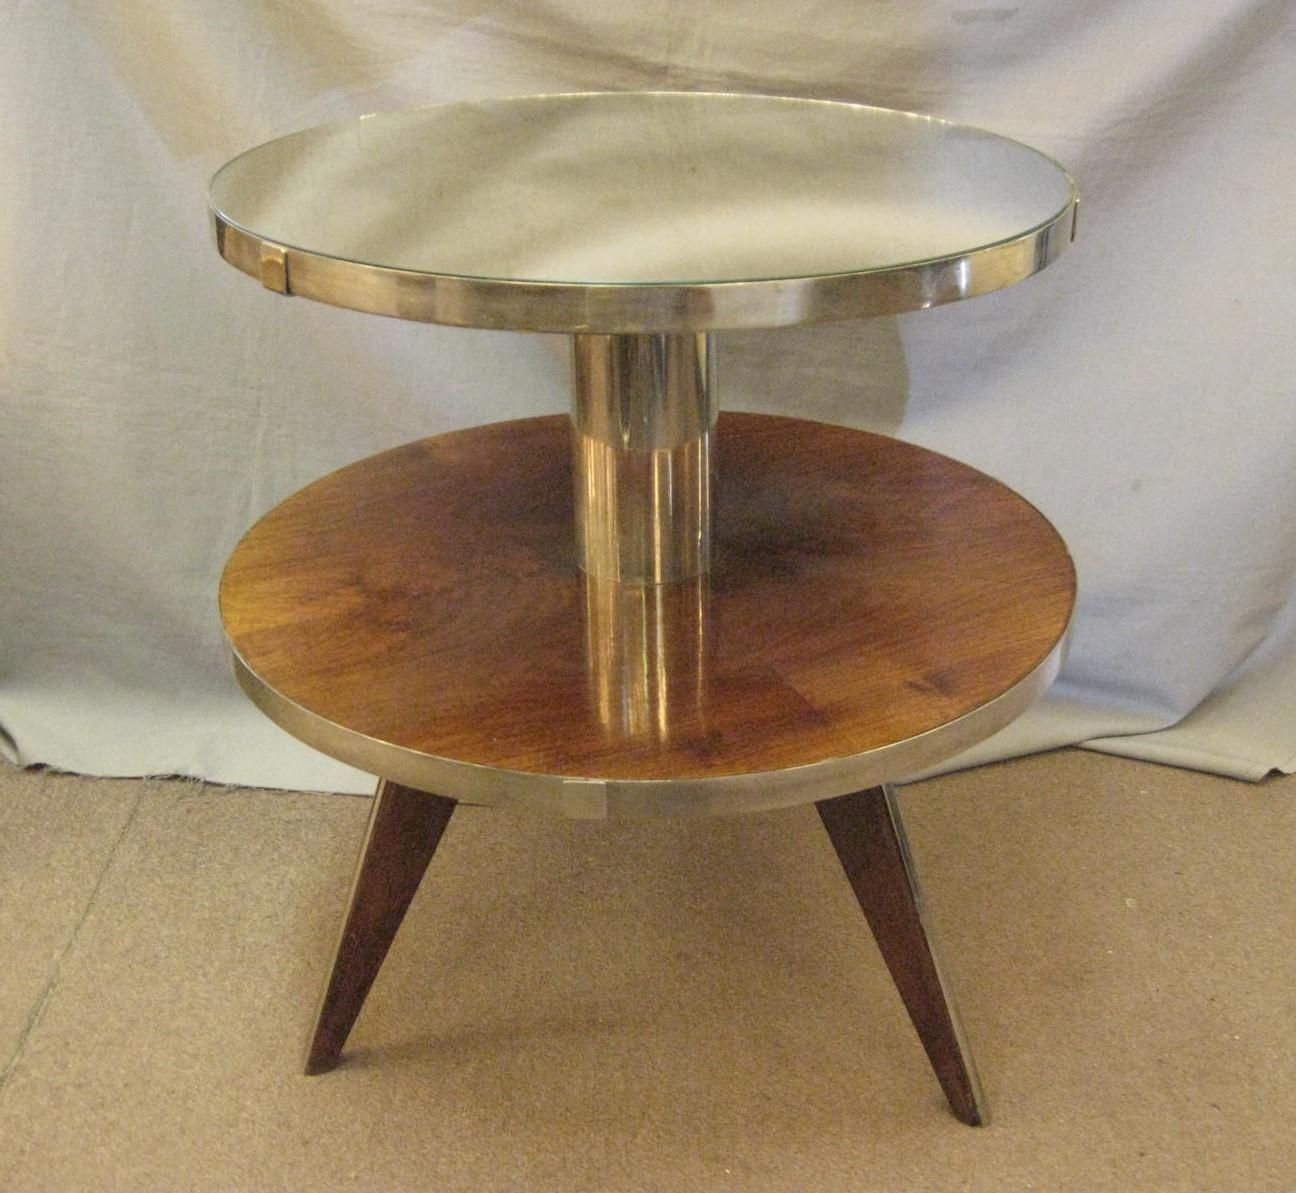 French Art Deco Occasional Table in Wood, Mirror, Nickel -Maurice Triboy For Sale 10